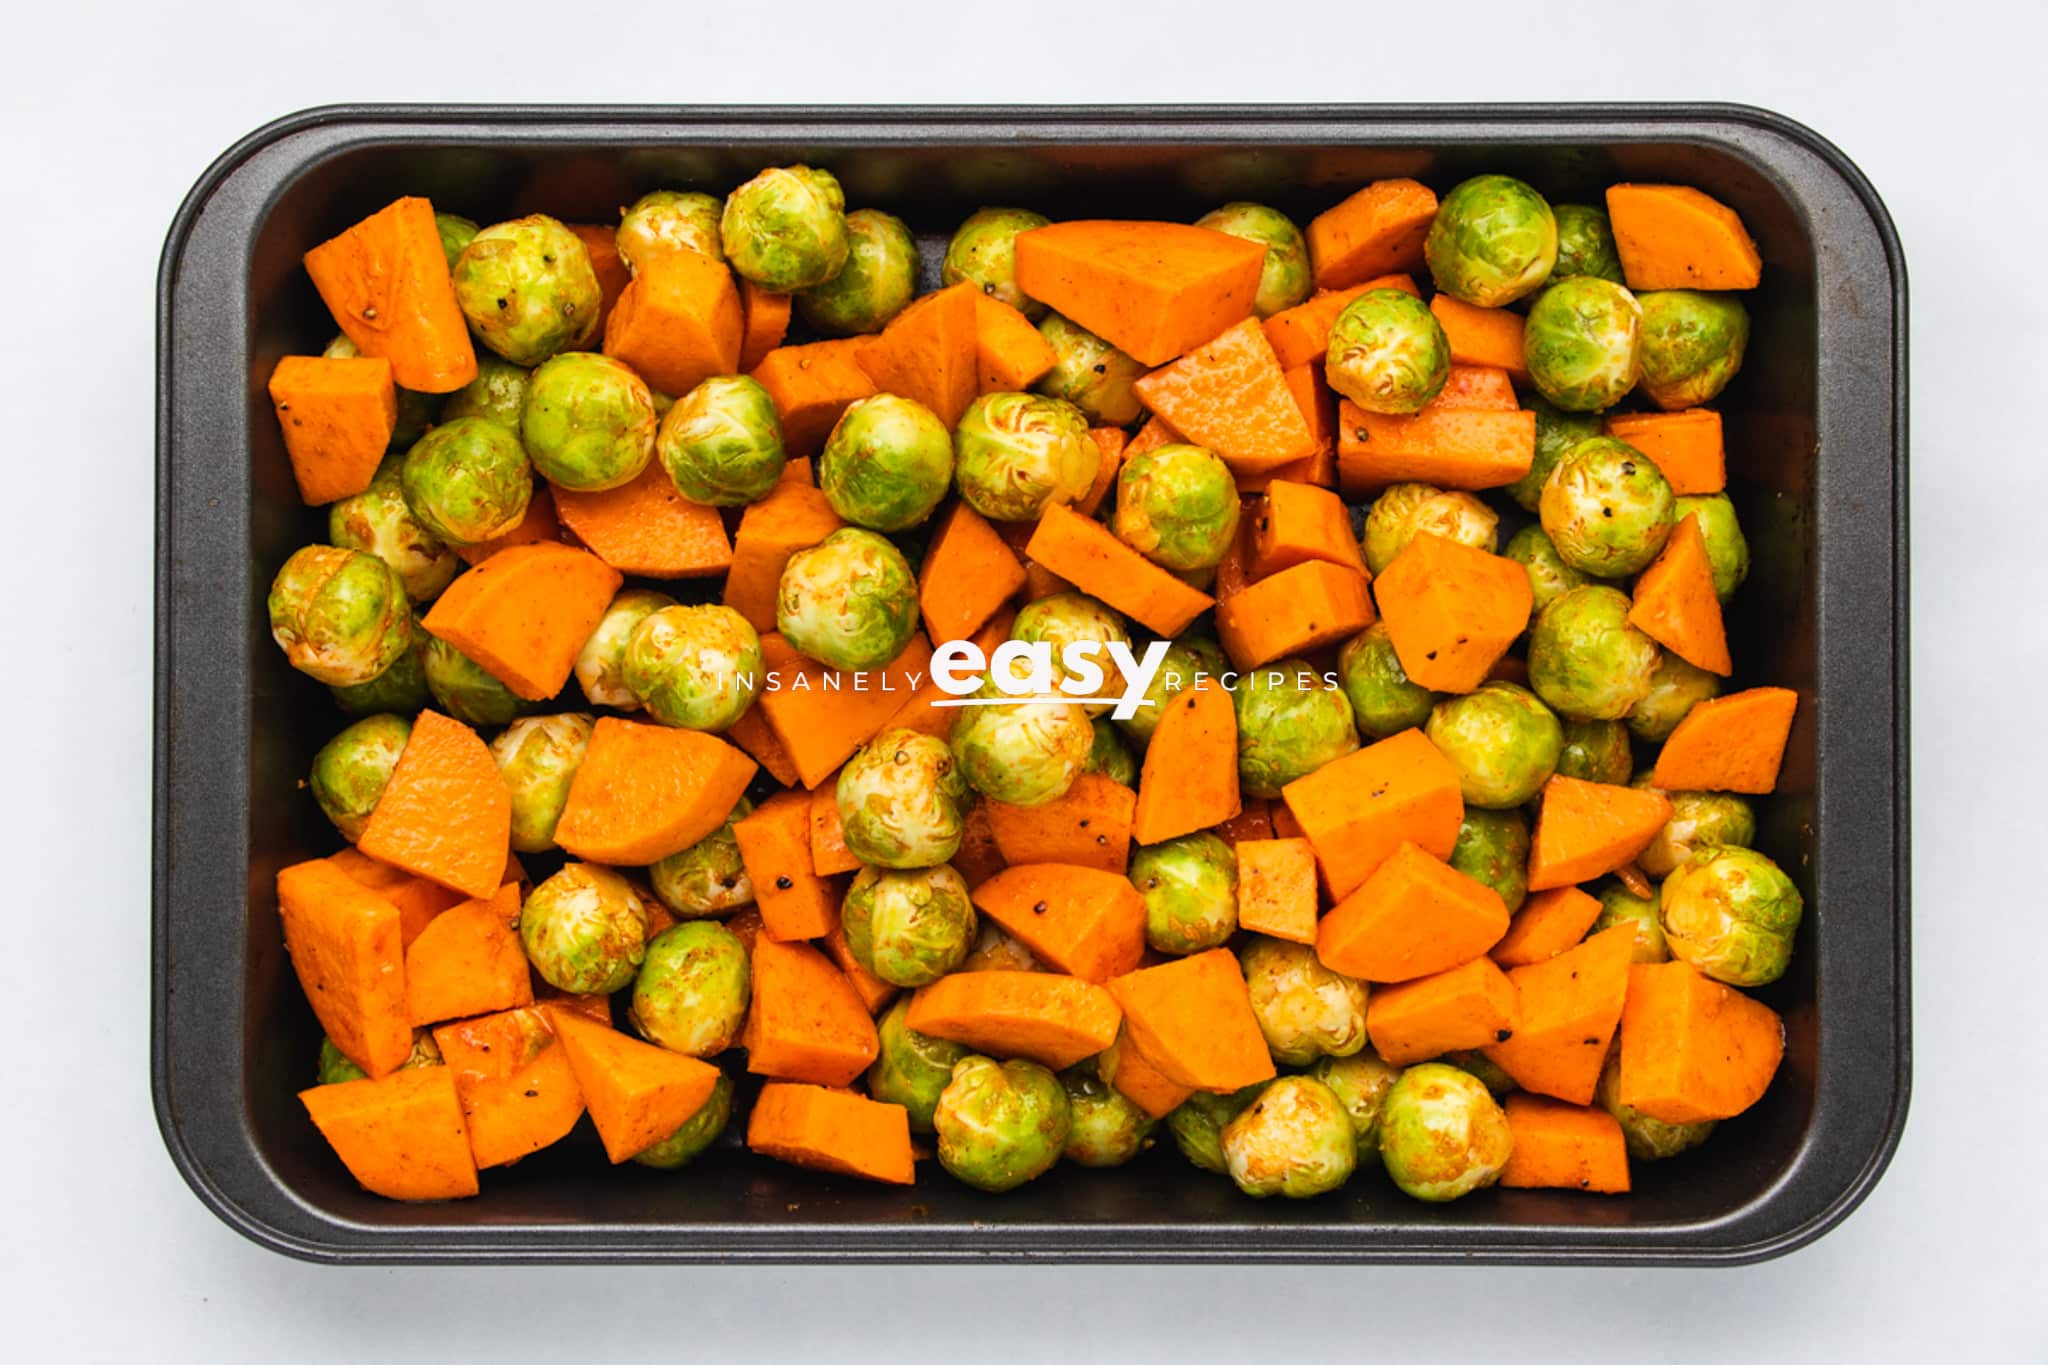 Top view photo of brussel sprouts and sweet potato chunks on a sheet pan, ready to roast in the oven.